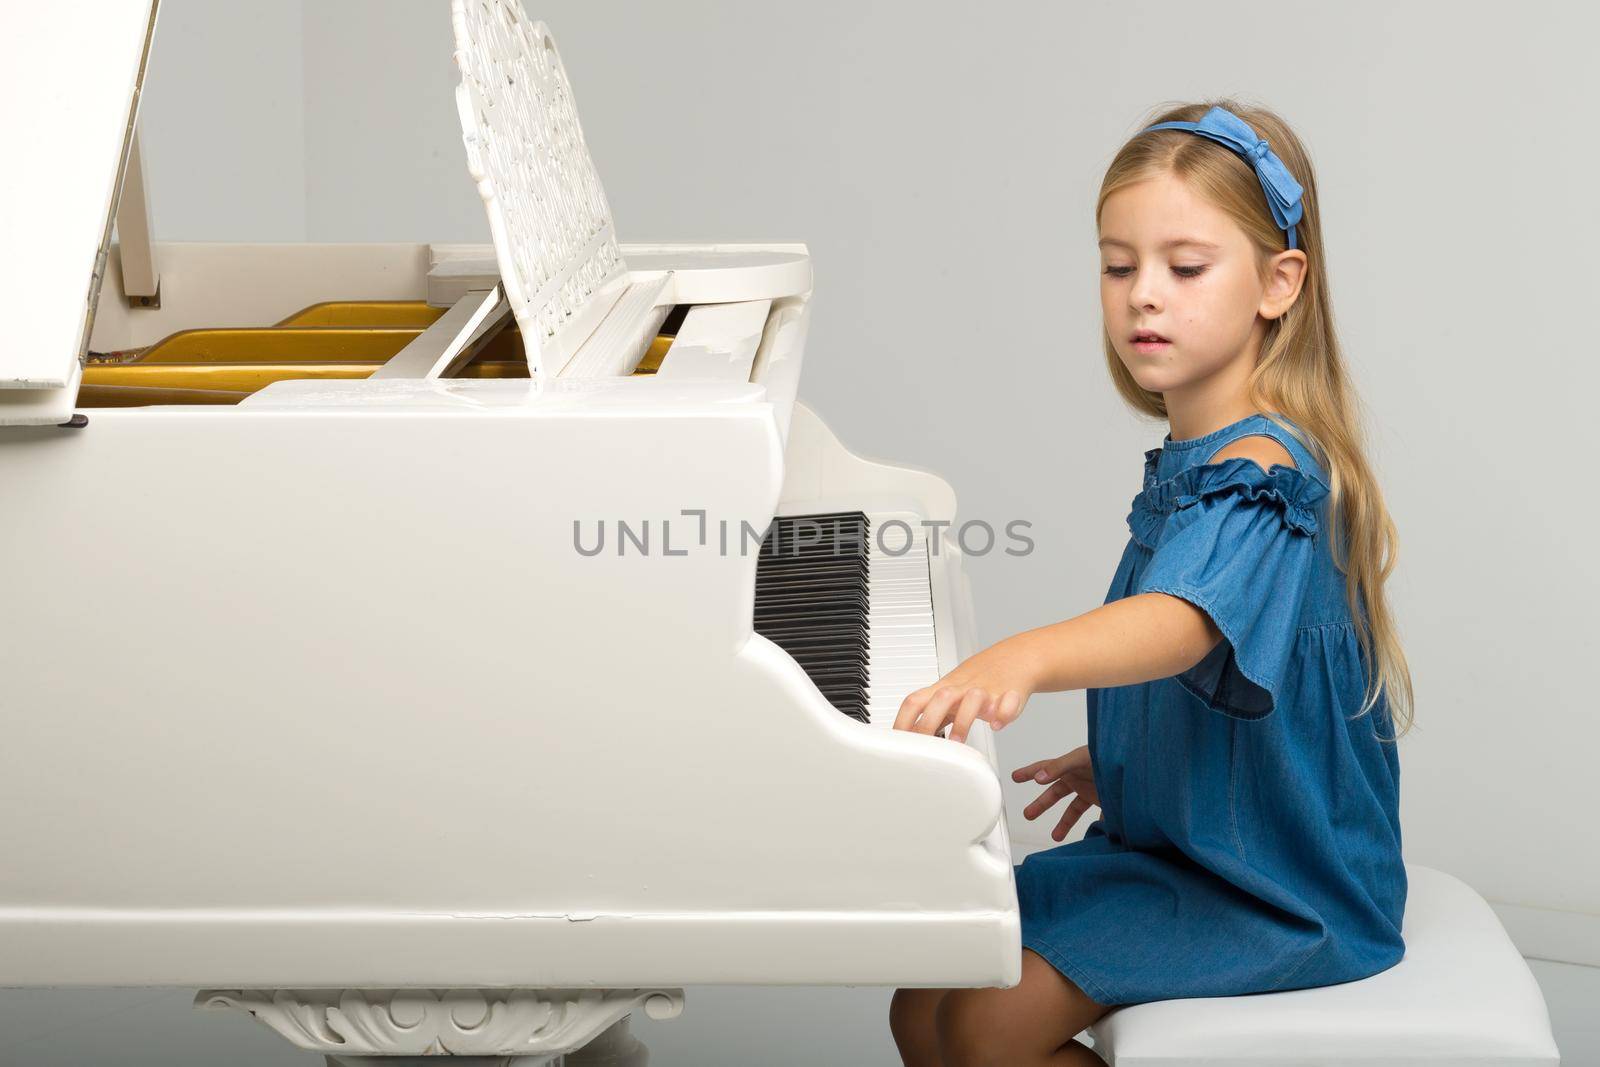 Charming girl posing at grand piano. Portrait of smiling six or seven years old girl posing at musical instrument. Portrait of adorable child wearing denim dress looking cheerfully at camera